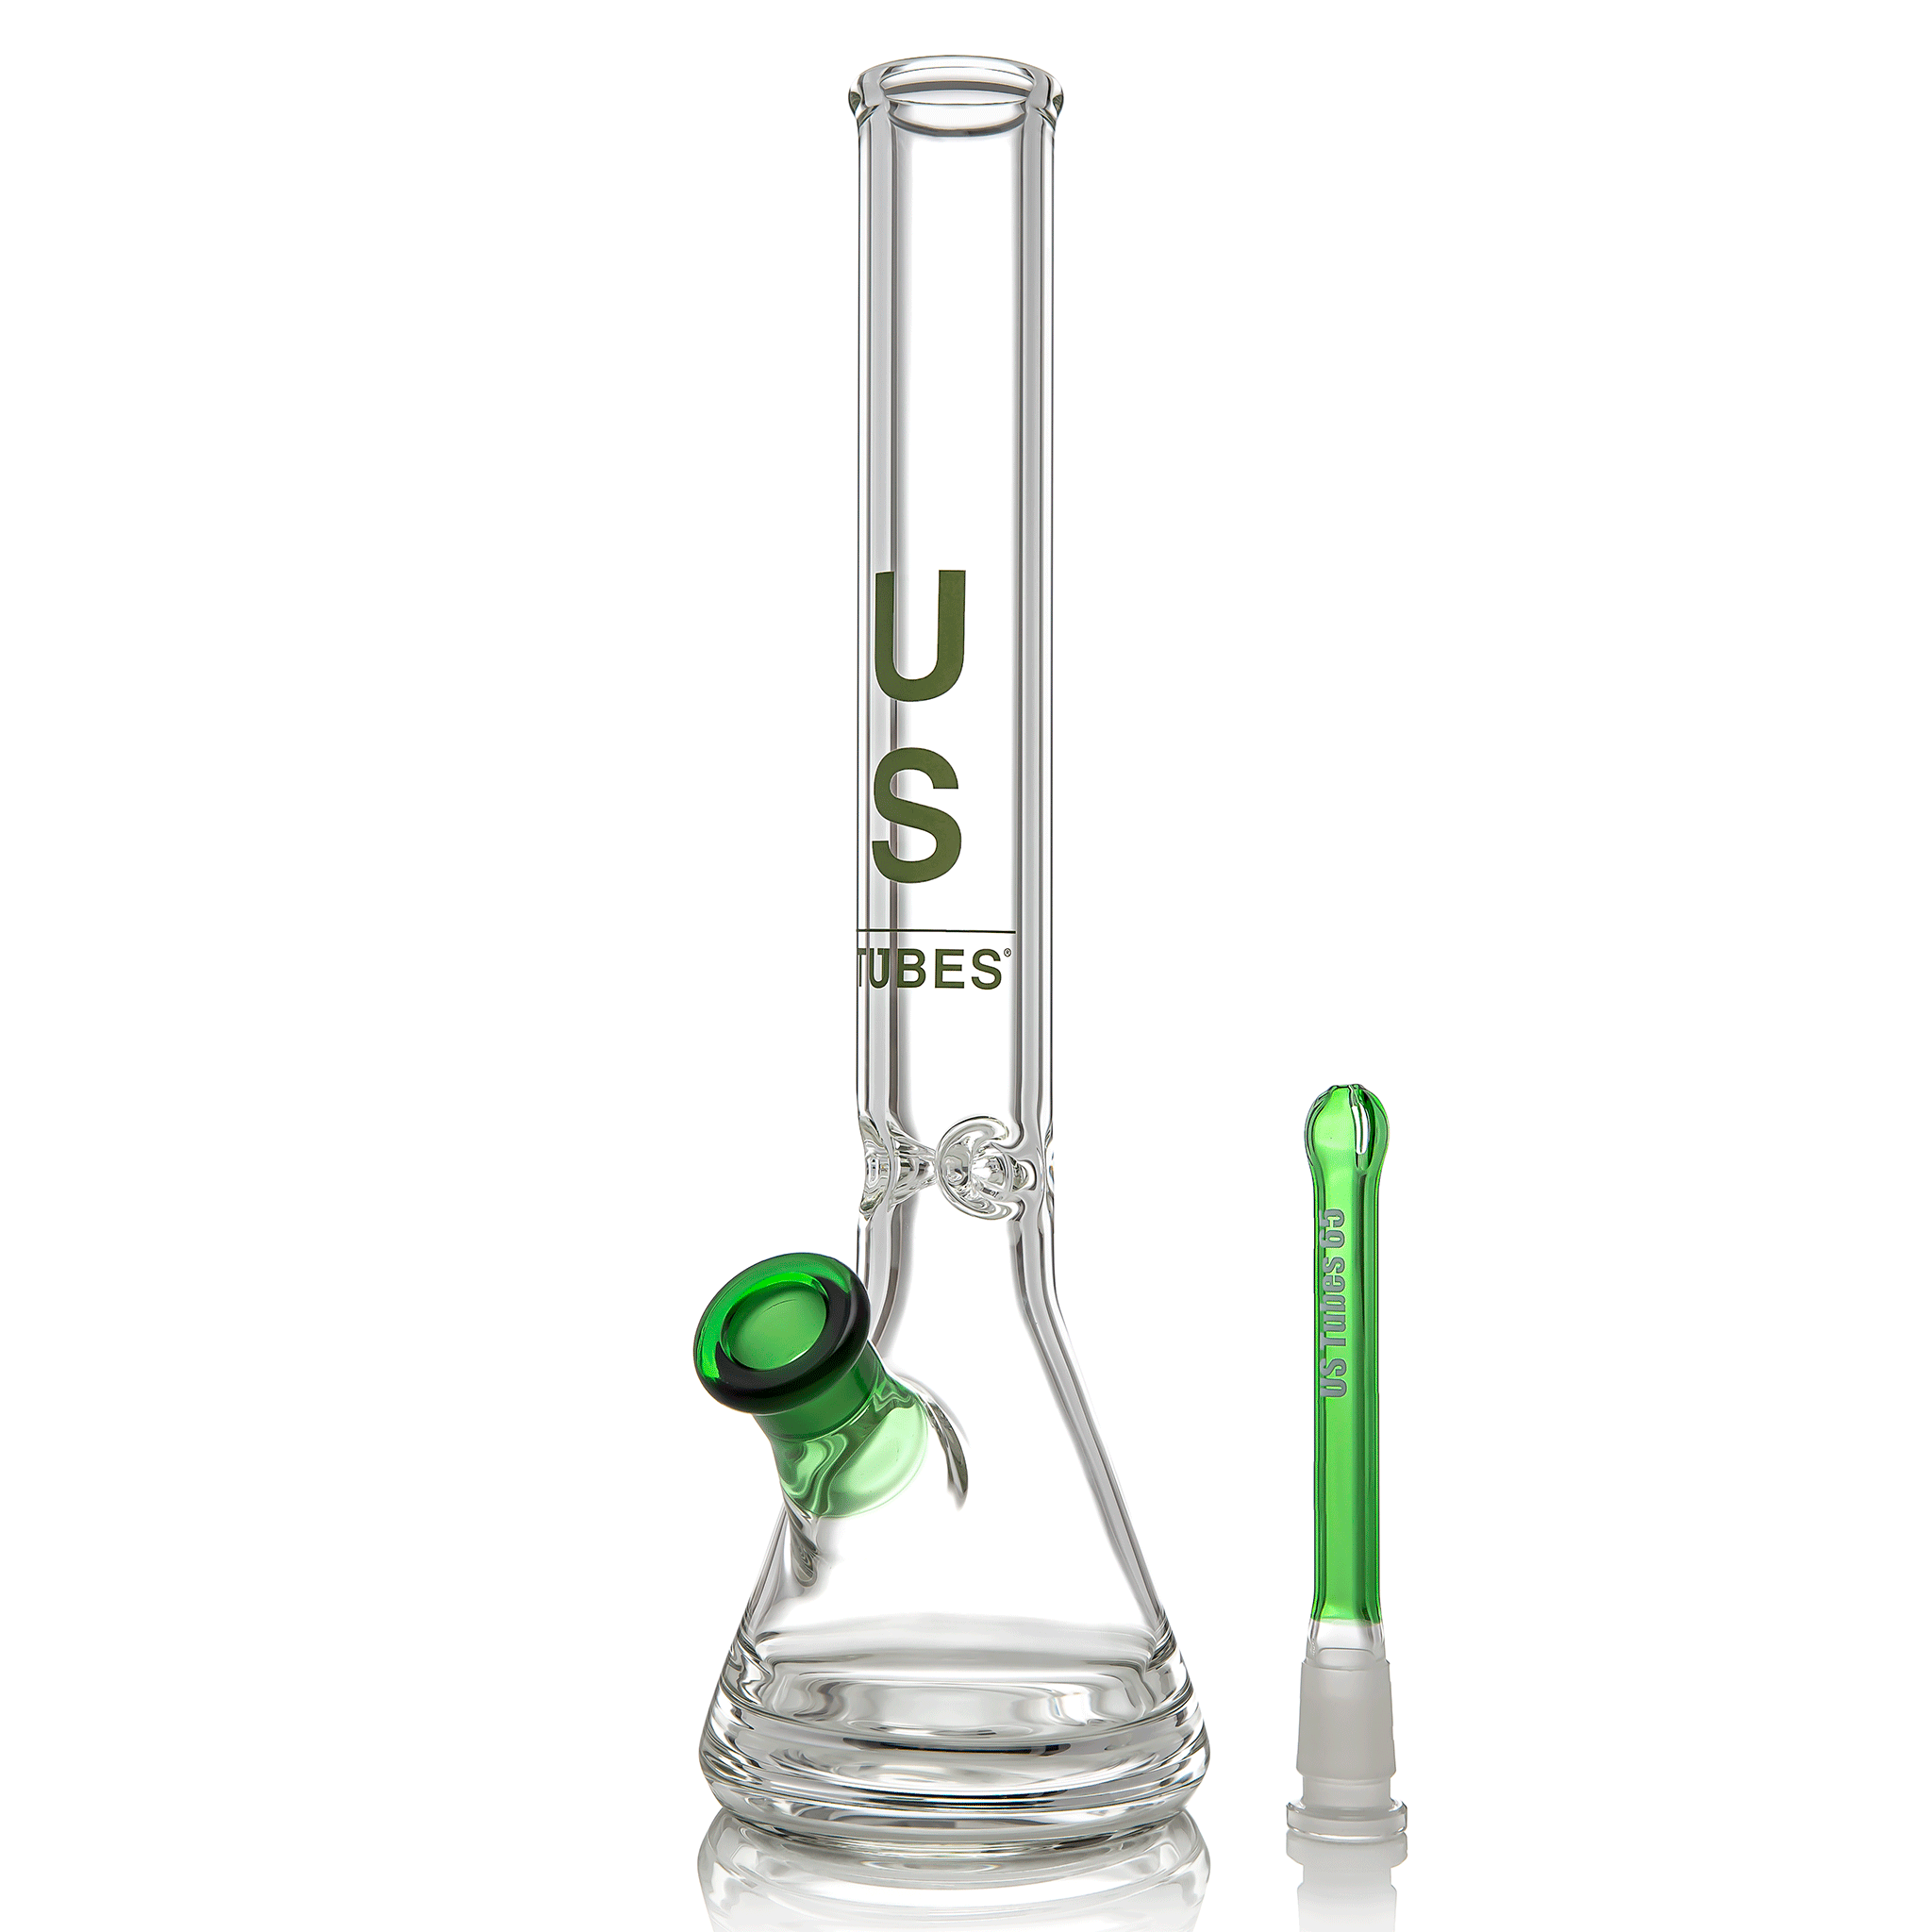 US TUBES Beaker with Green Joint 